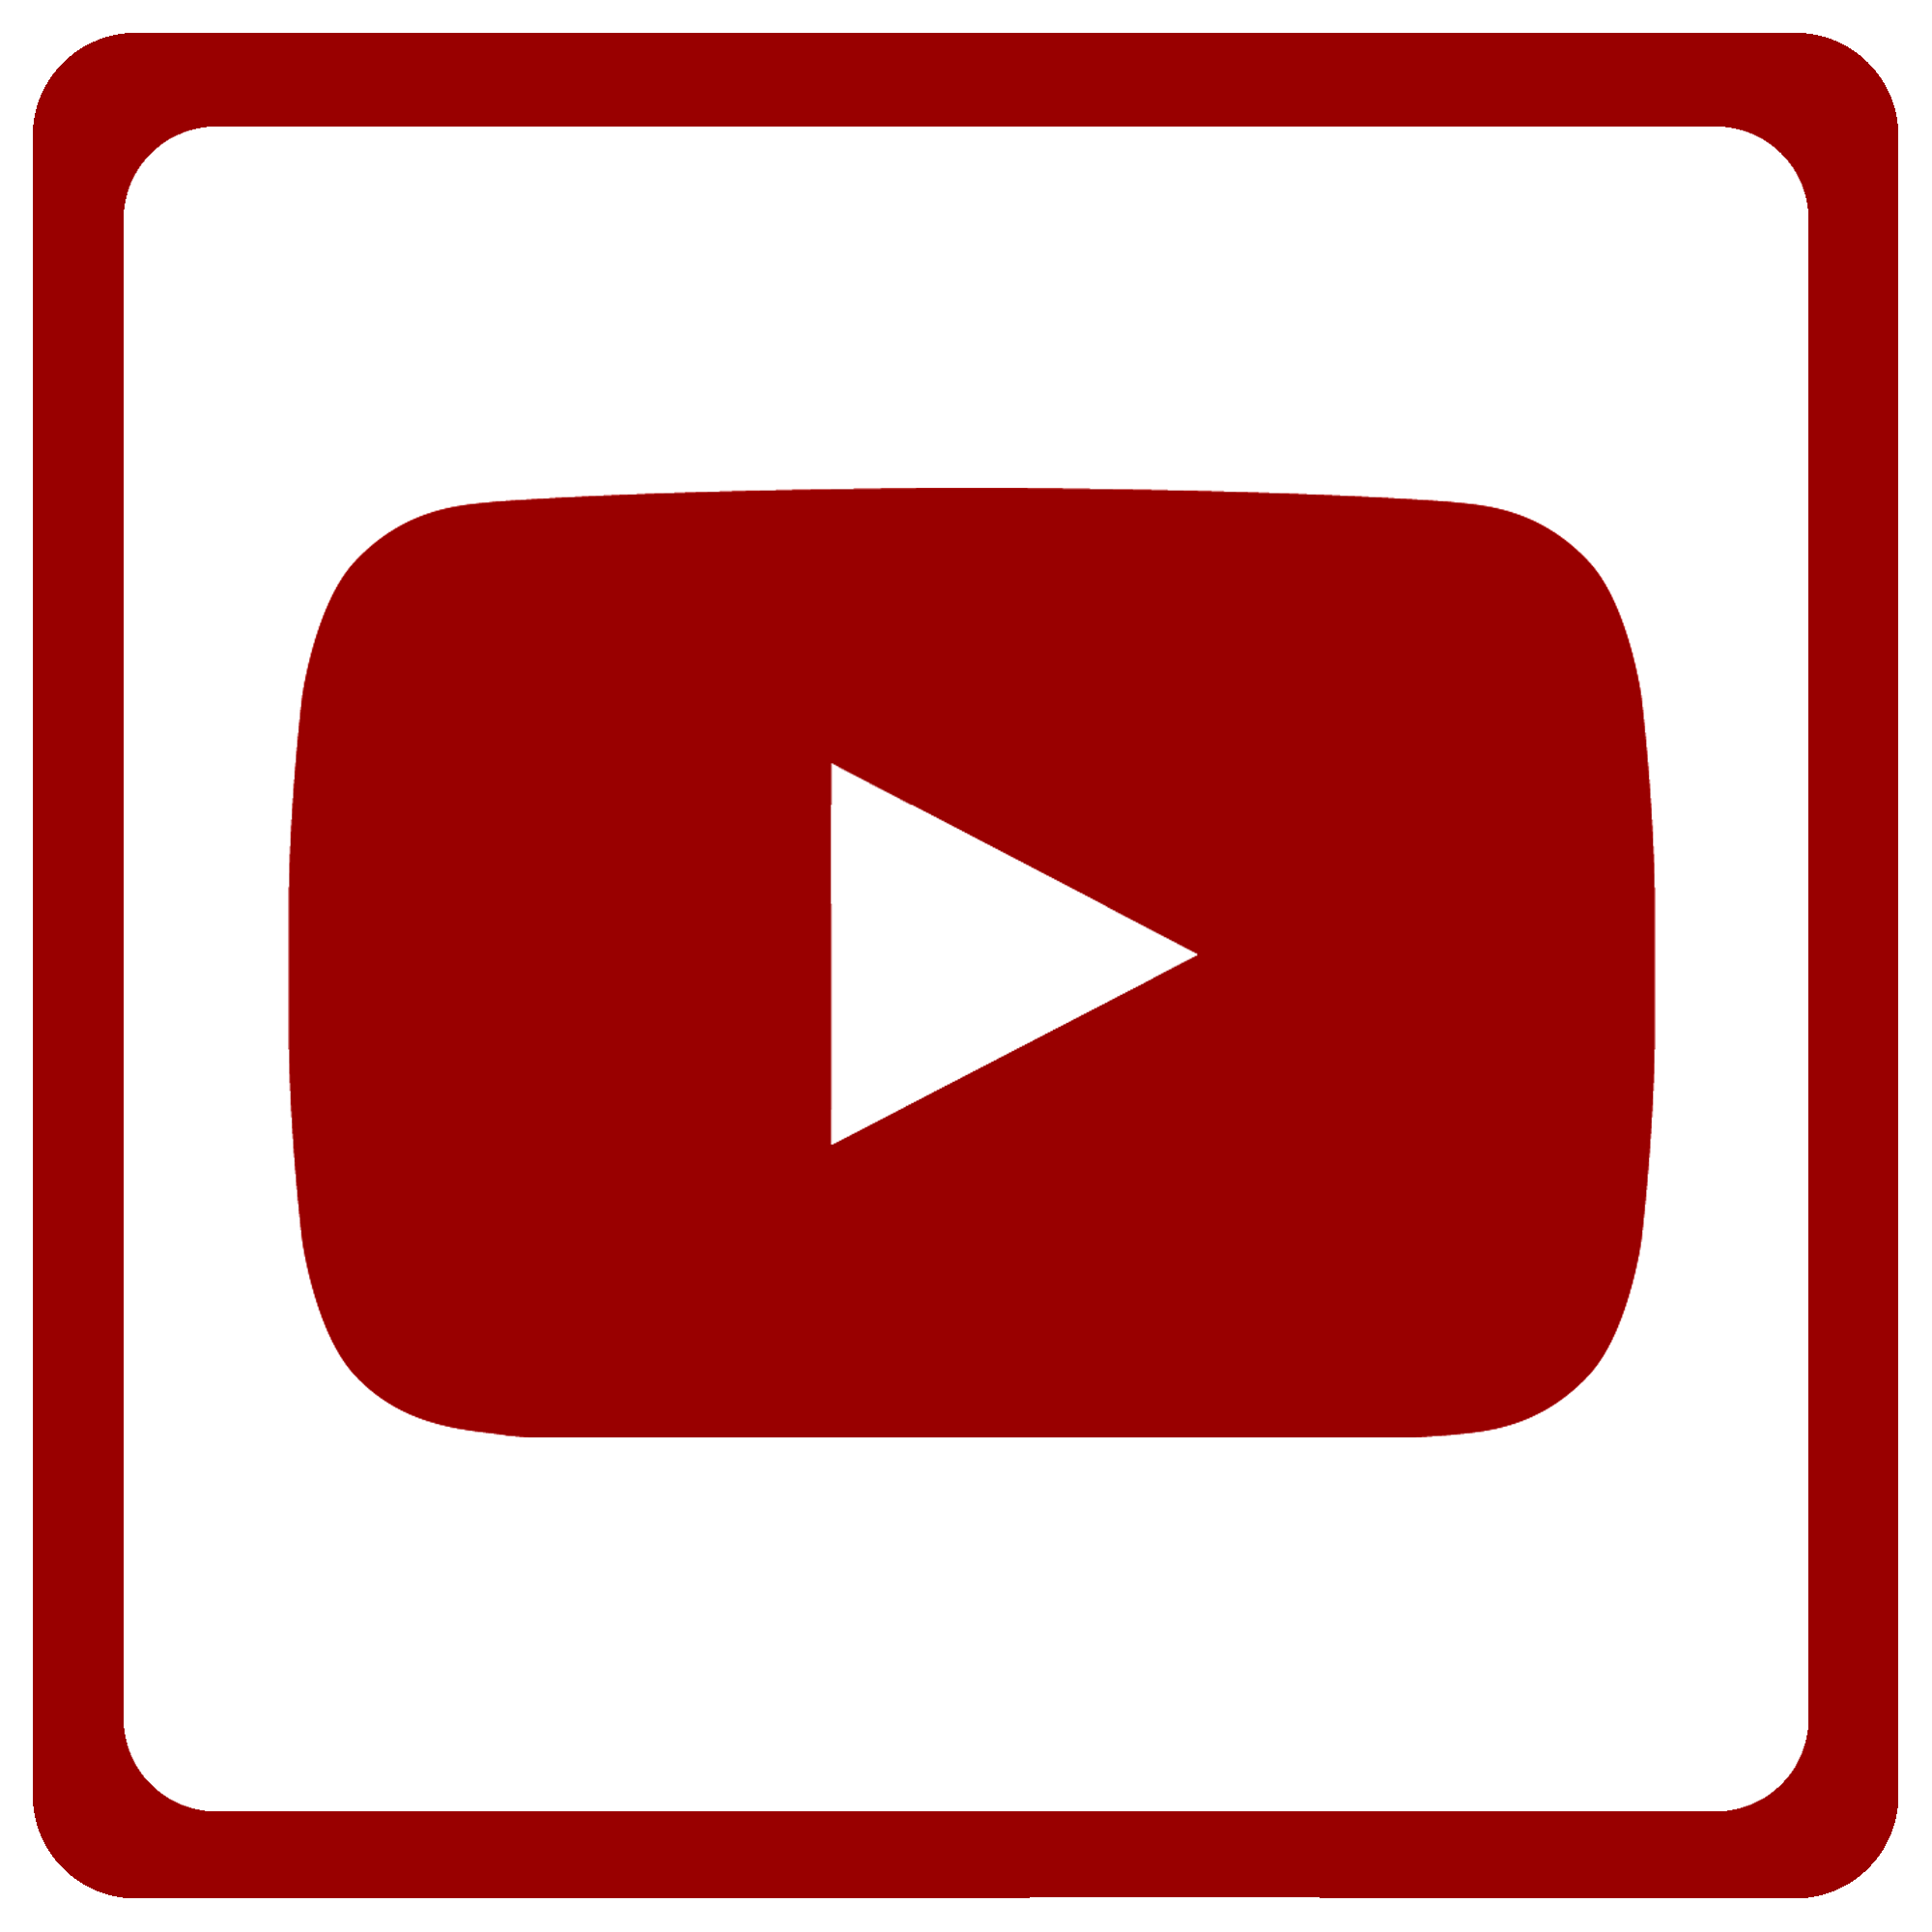 Youtube Logo Png White And Red - Atomussekkai.blogspot.com